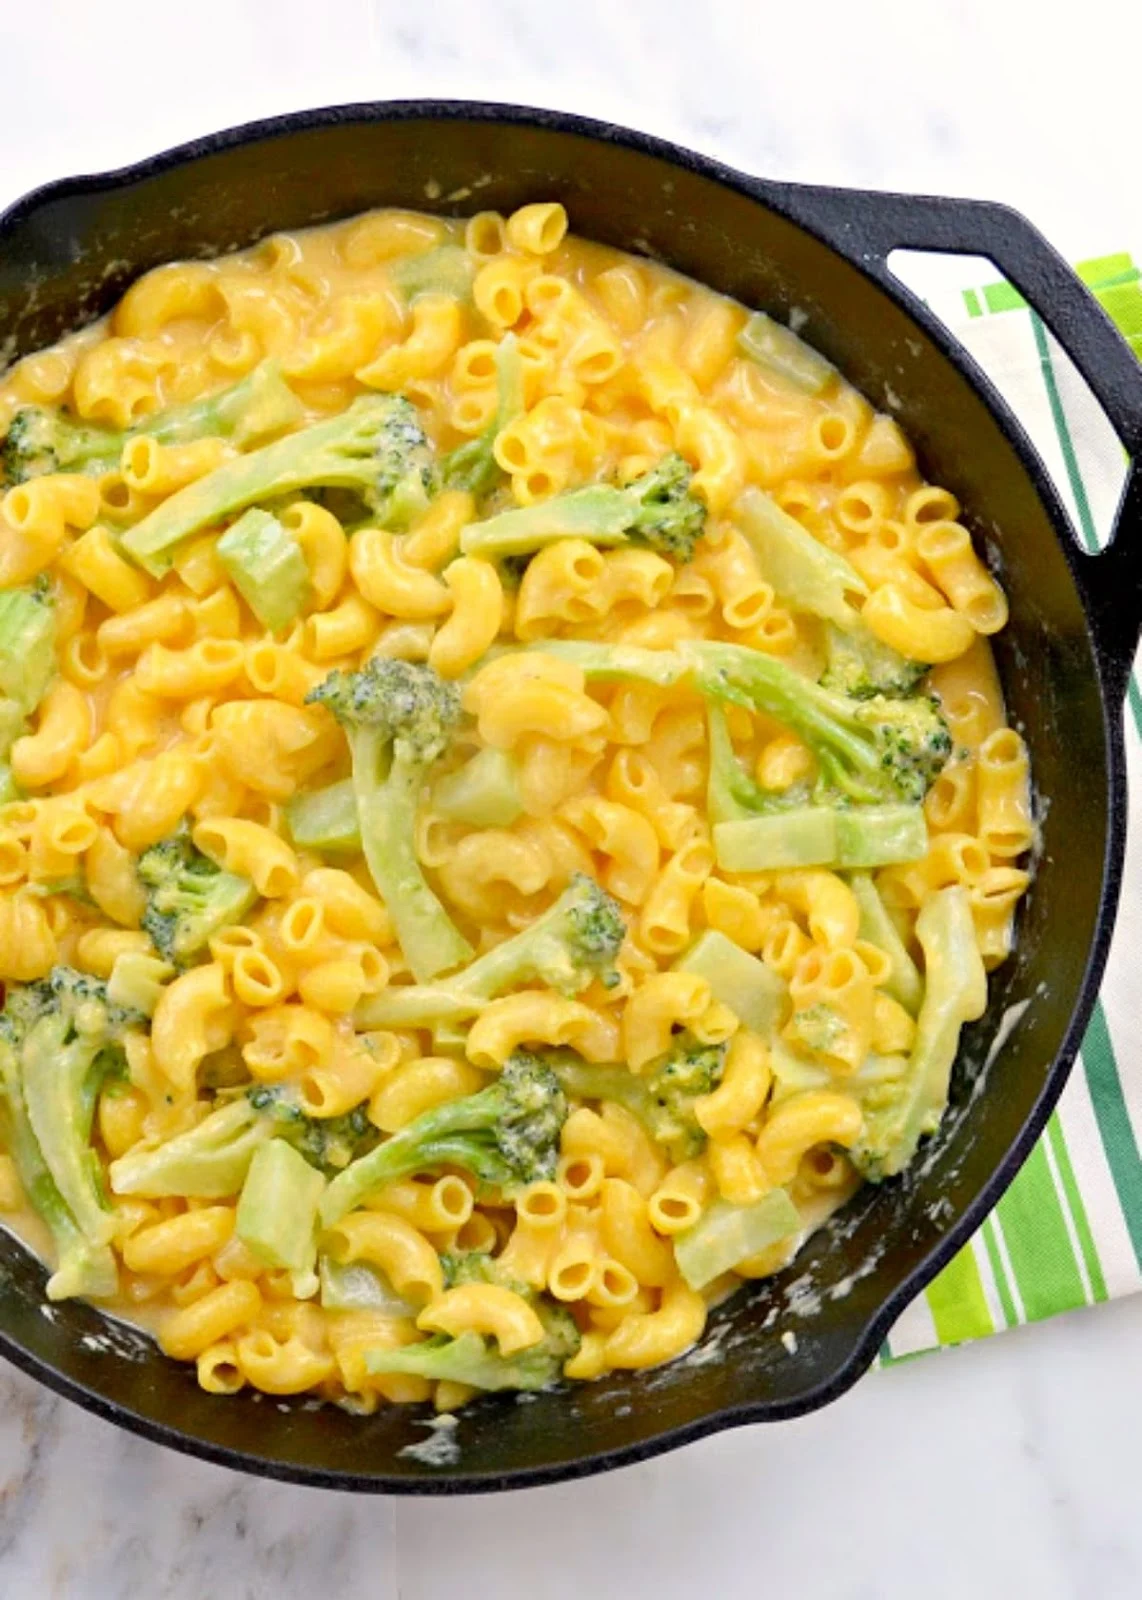 Creamy Macaroni and Cheese with Broccoli in a cast iron skillet with a green and white striped hand towel.